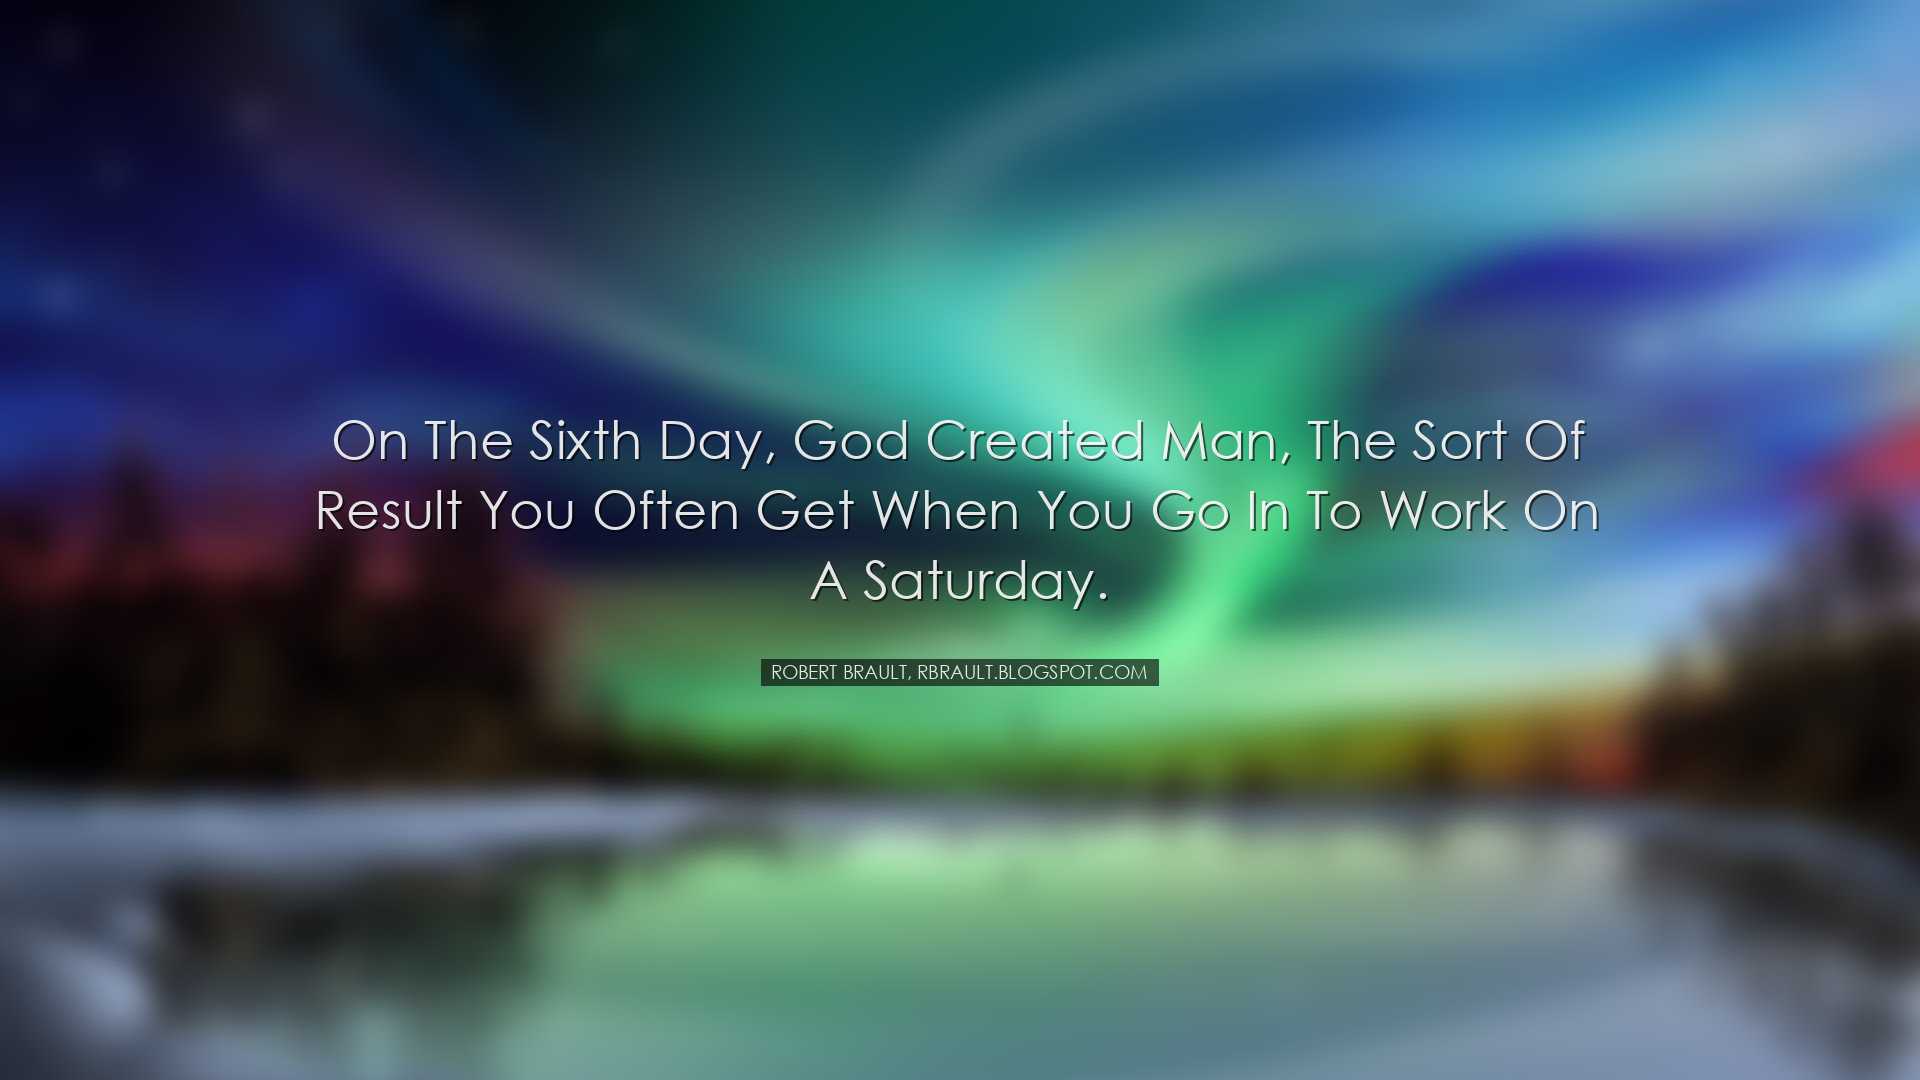 On the Sixth Day, God created man, the sort of result you often ge